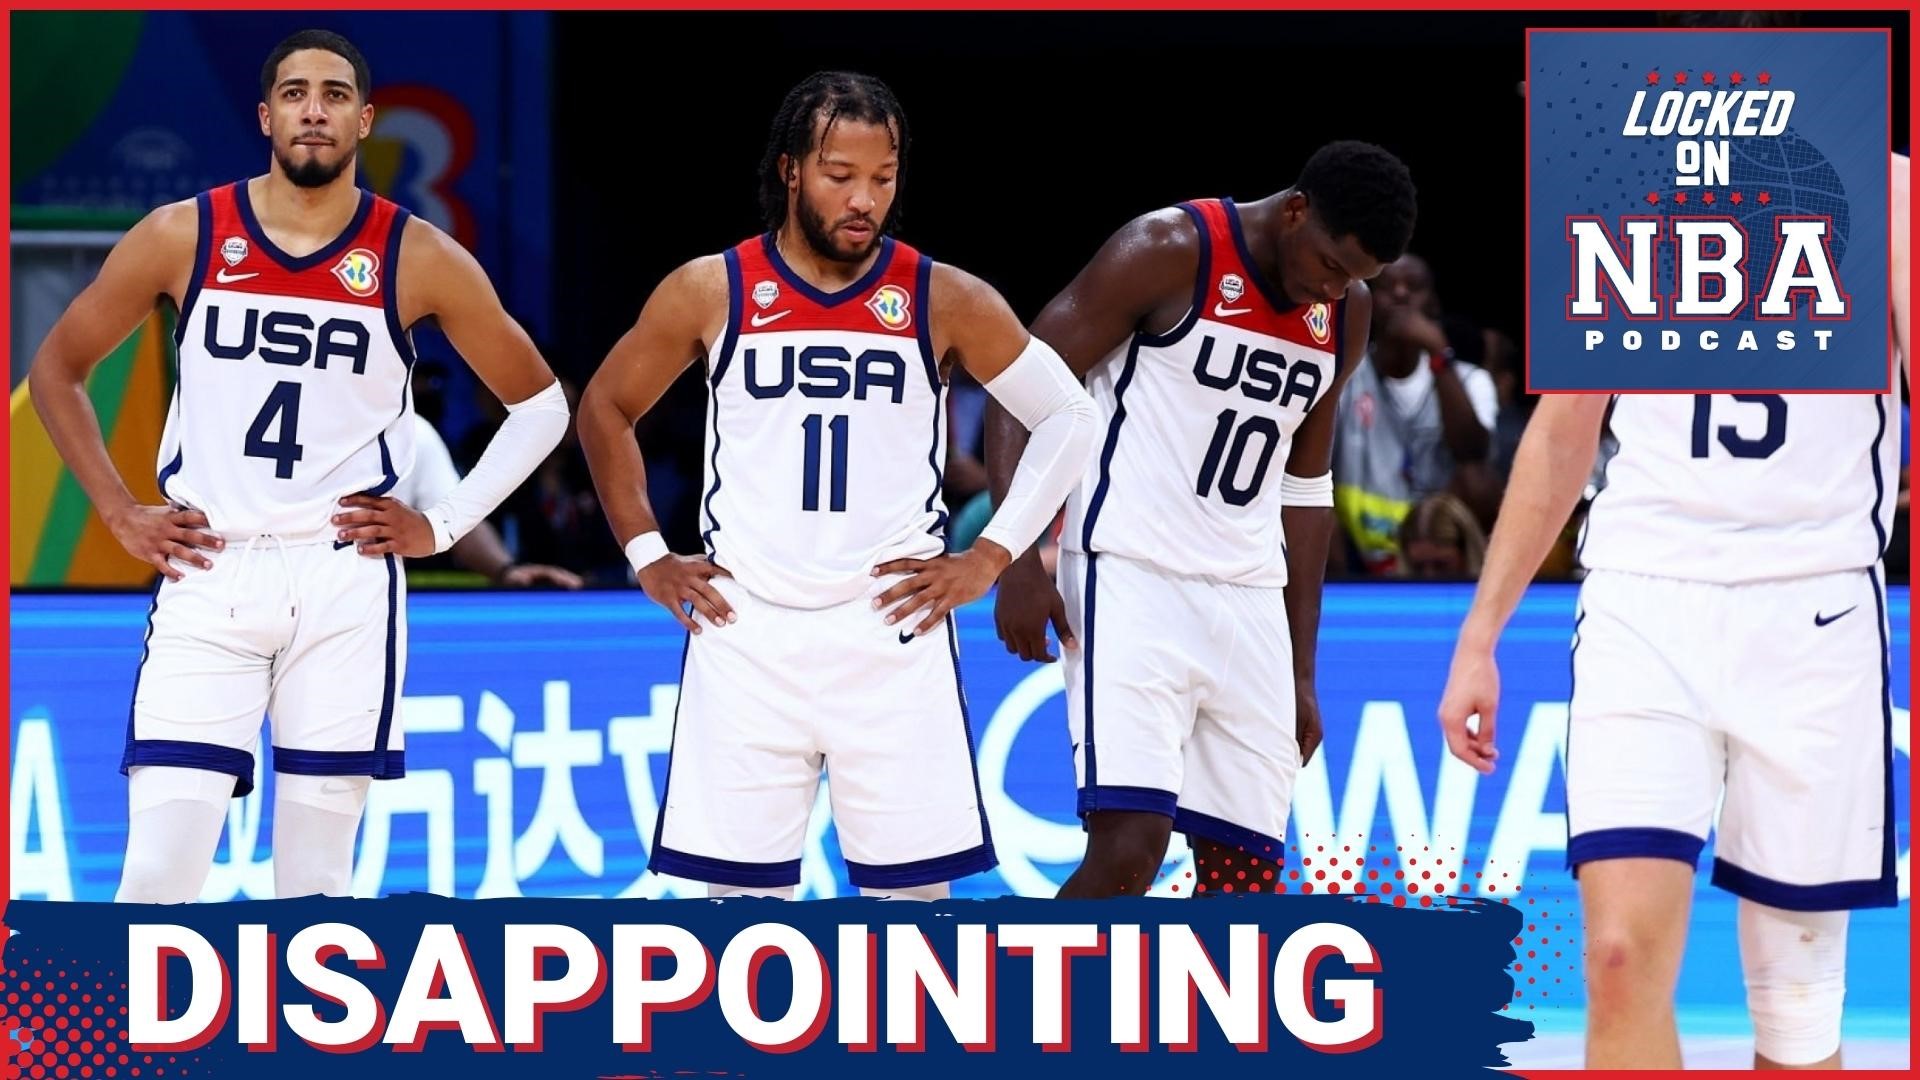 Host Jackson Gatlin is joined by Locked On Knicks, Lakers, & Thunder to discuss USA disappointing FIBA World Cup Run, Christian Wood signing in LA & NBA COTY odds.